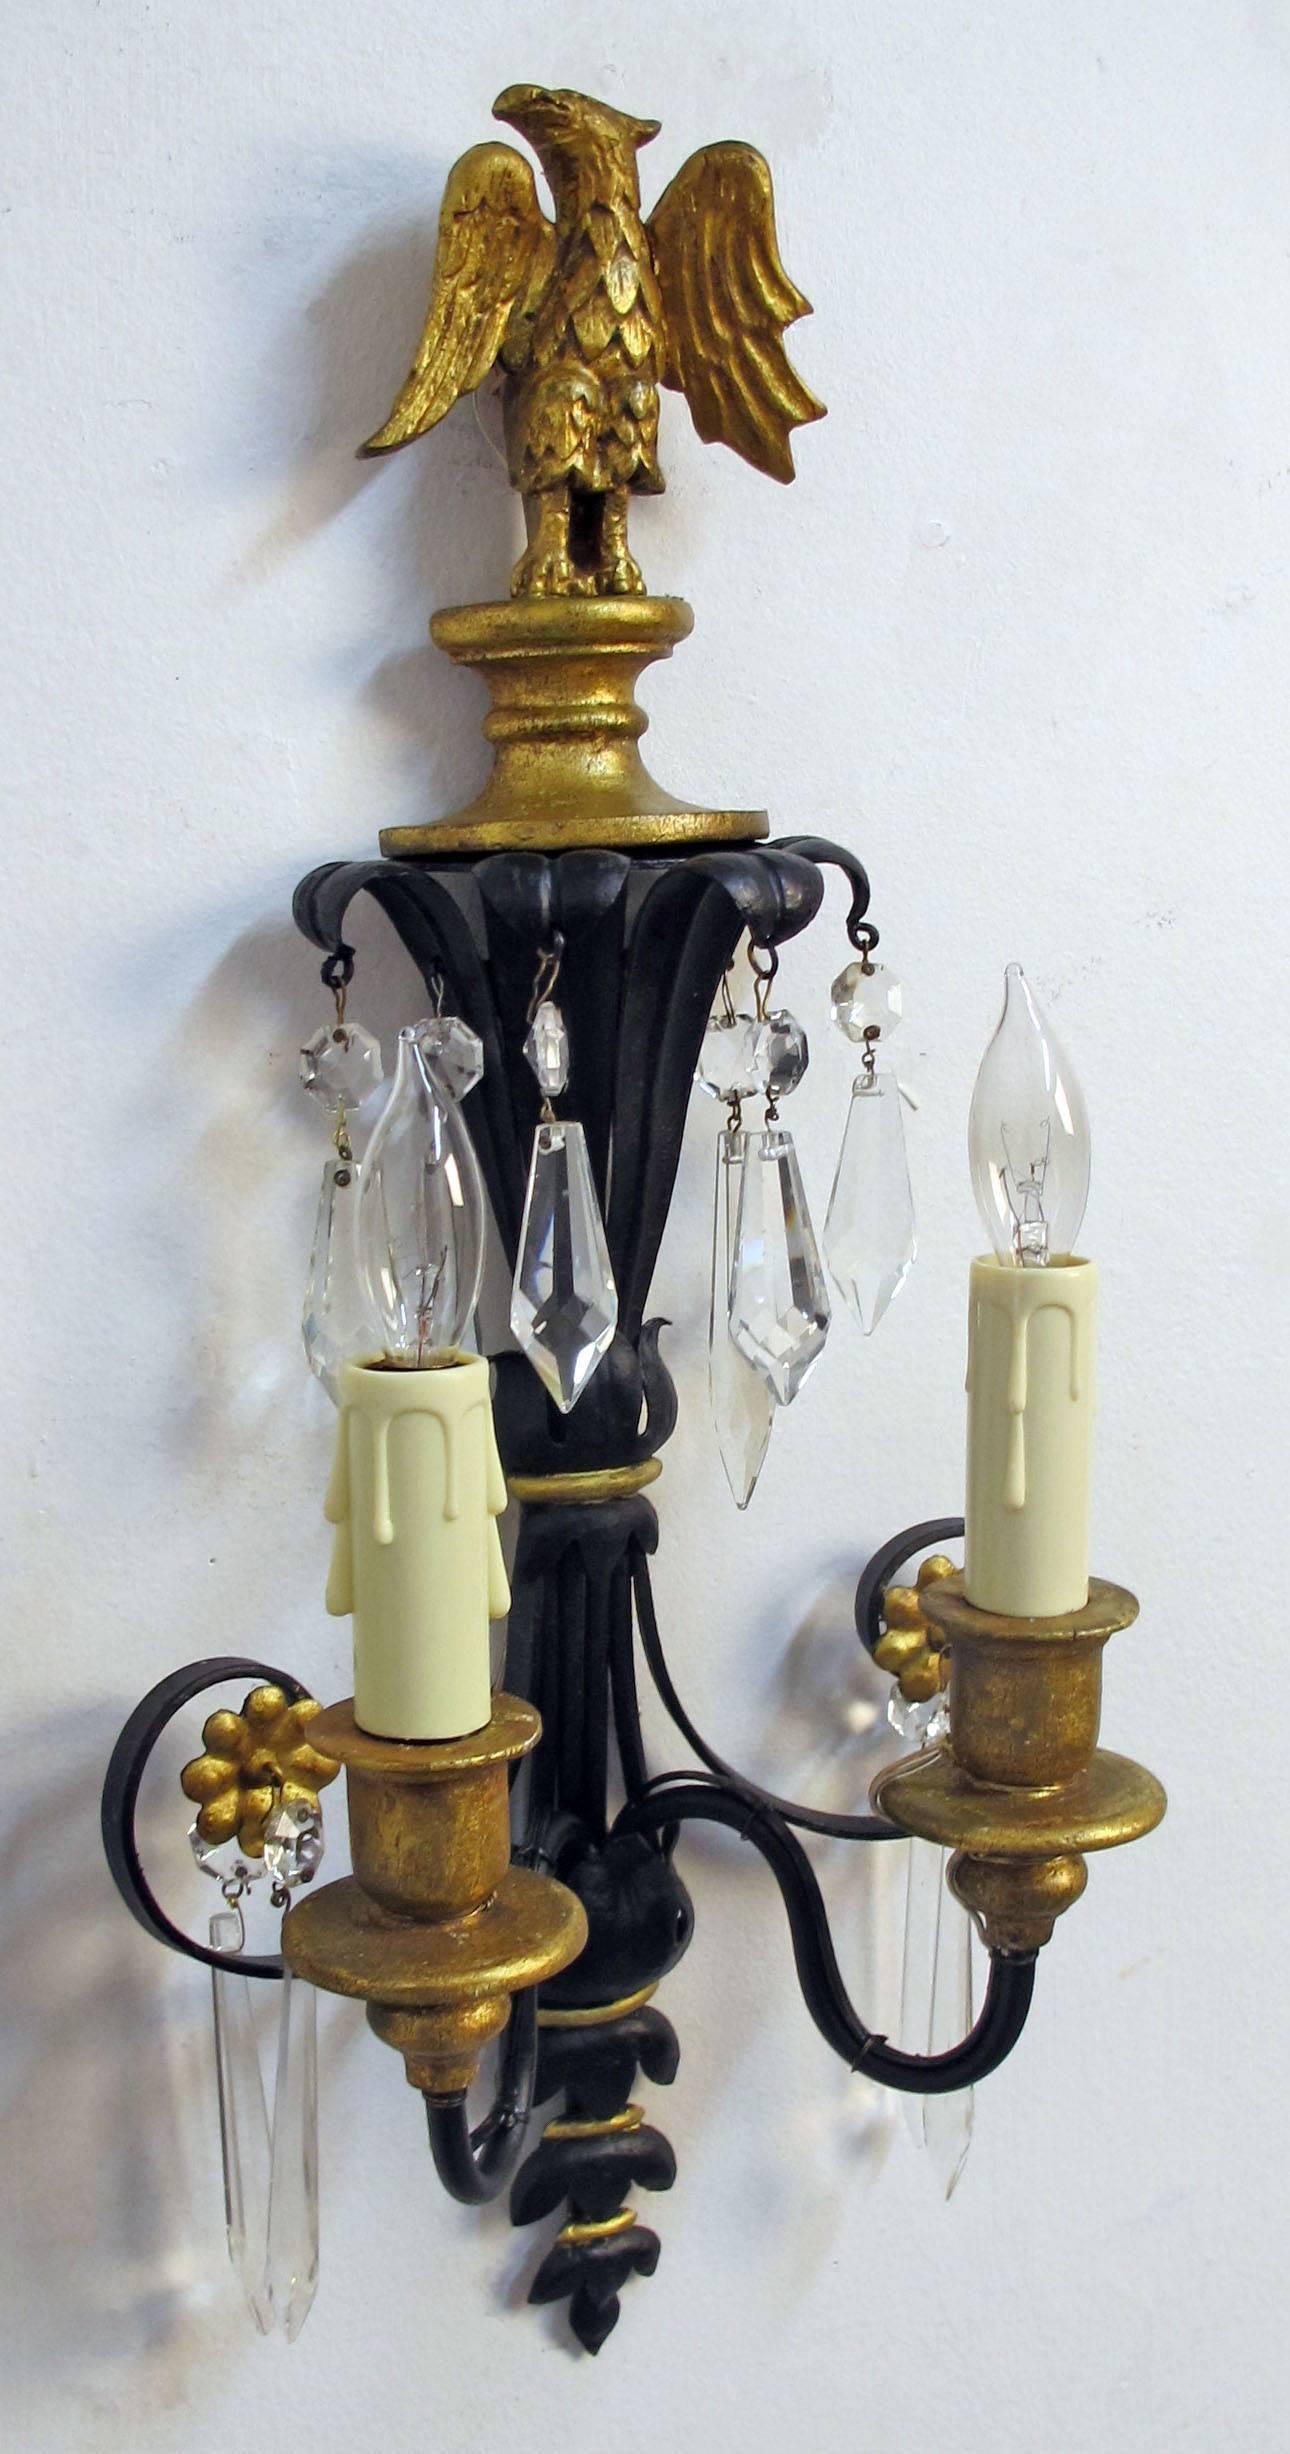 20th Century Pair of Federal Style Black and Gilt Sconces